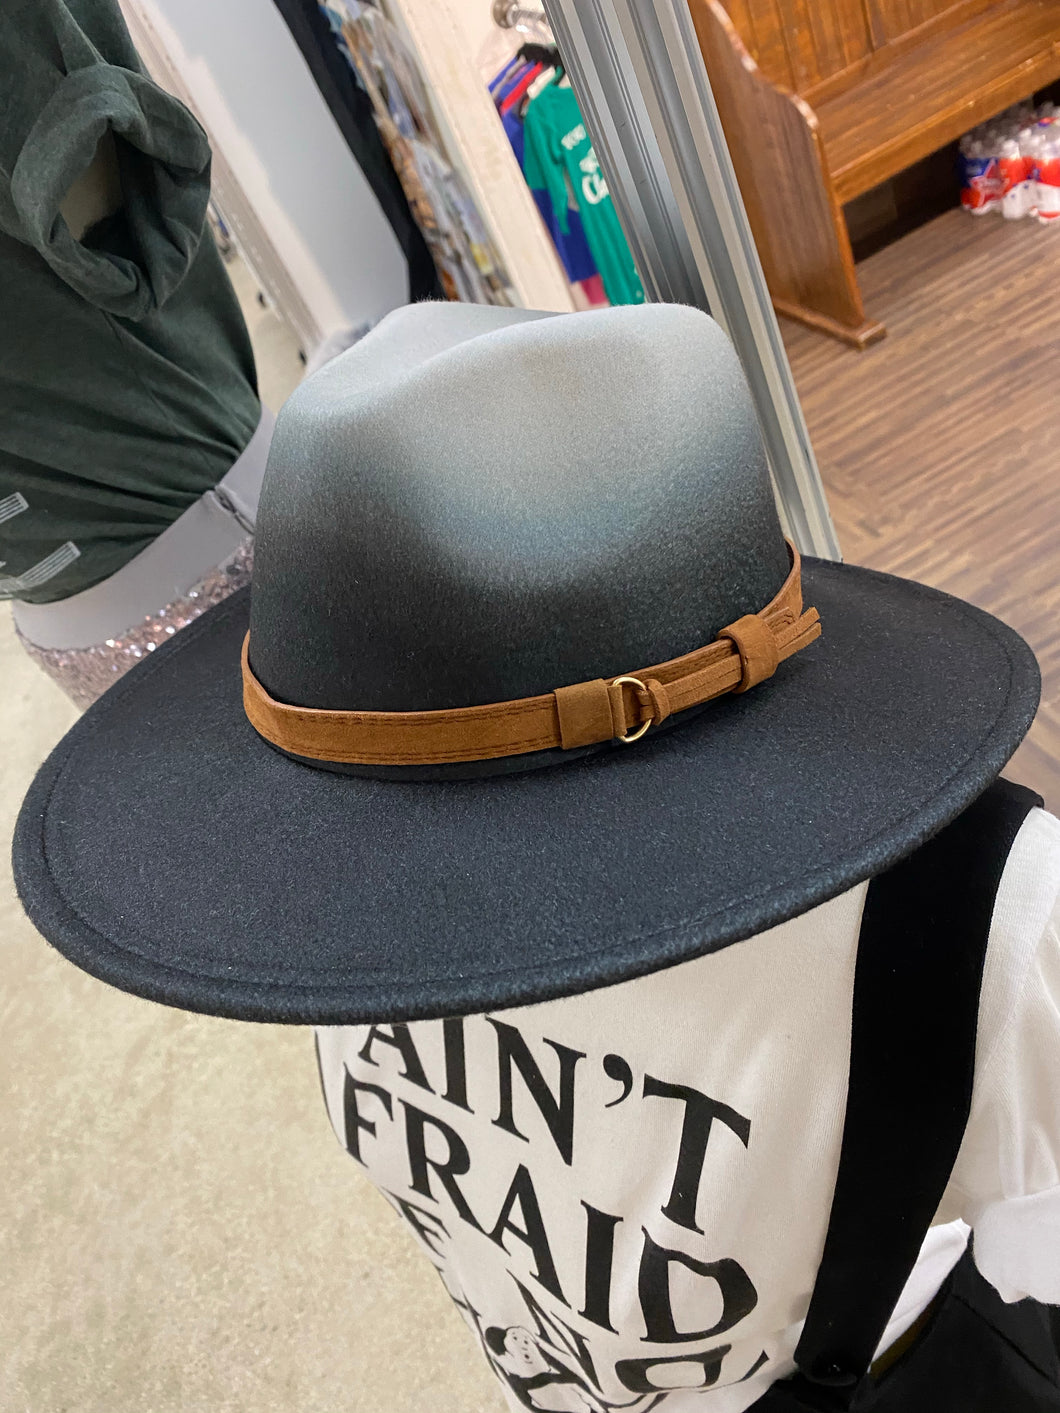 The Ombre Felt Hat